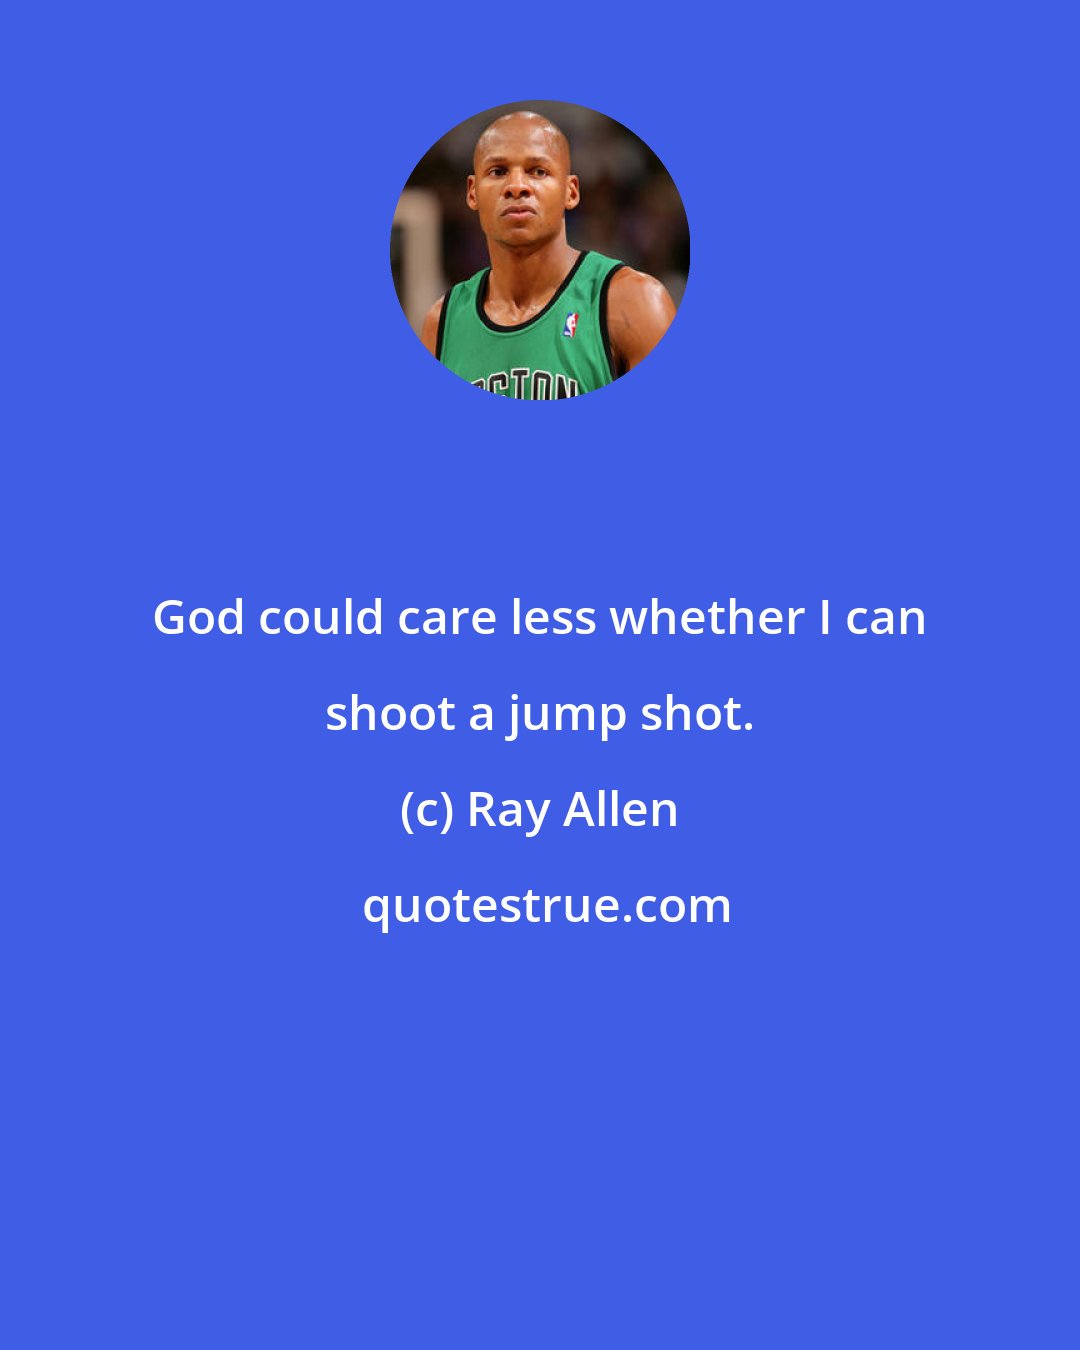 Ray Allen: God could care less whether I can shoot a jump shot.